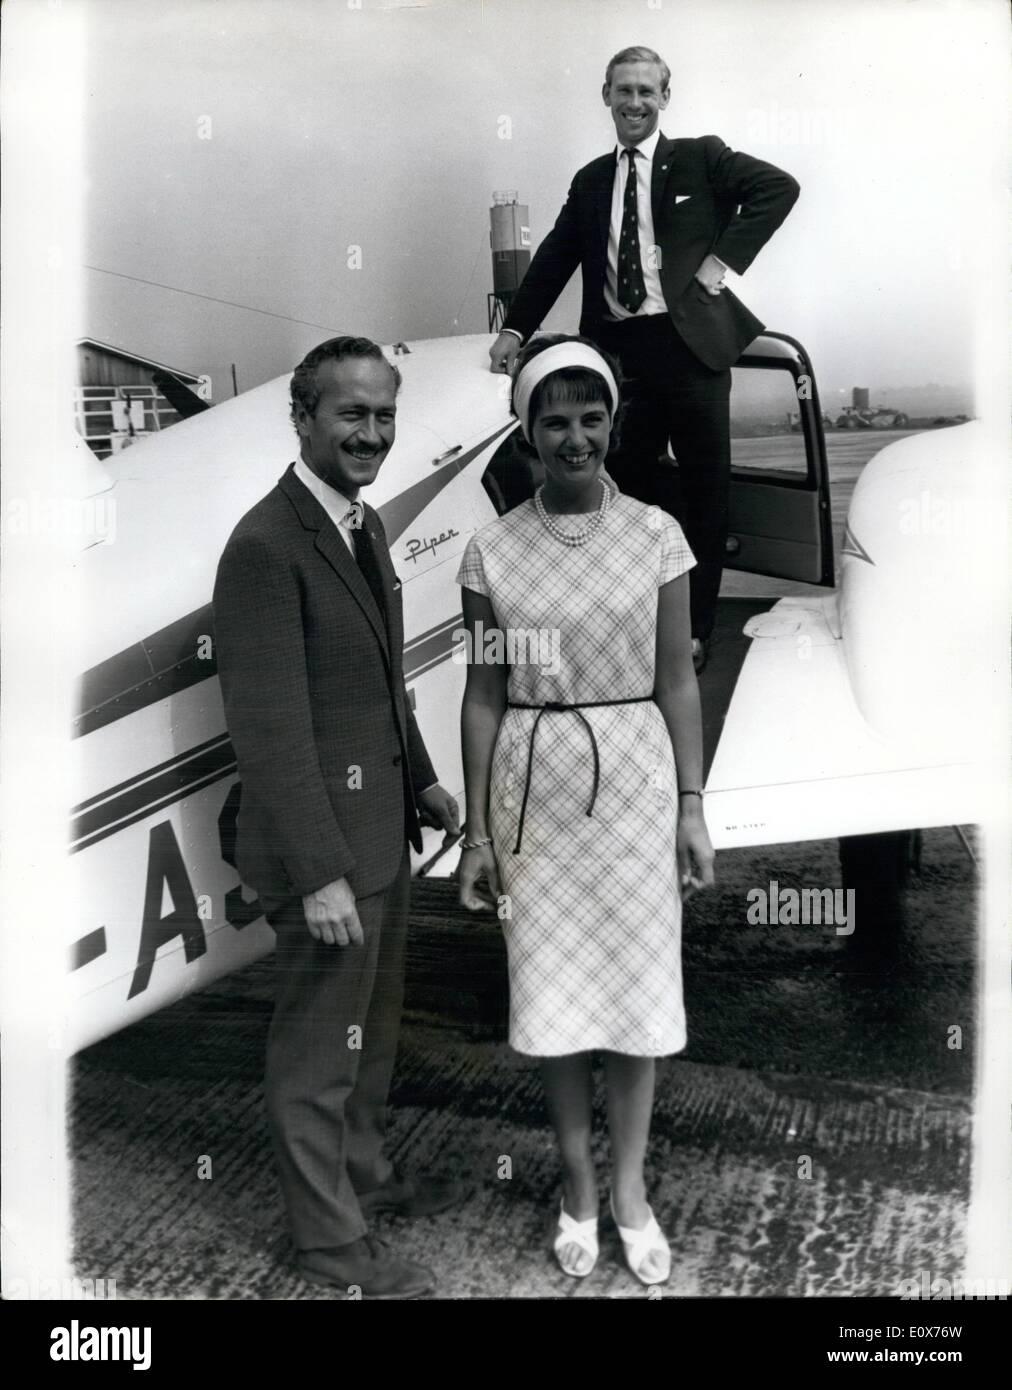 July 07, 1965. Colin Chapman flies home with a private plane.